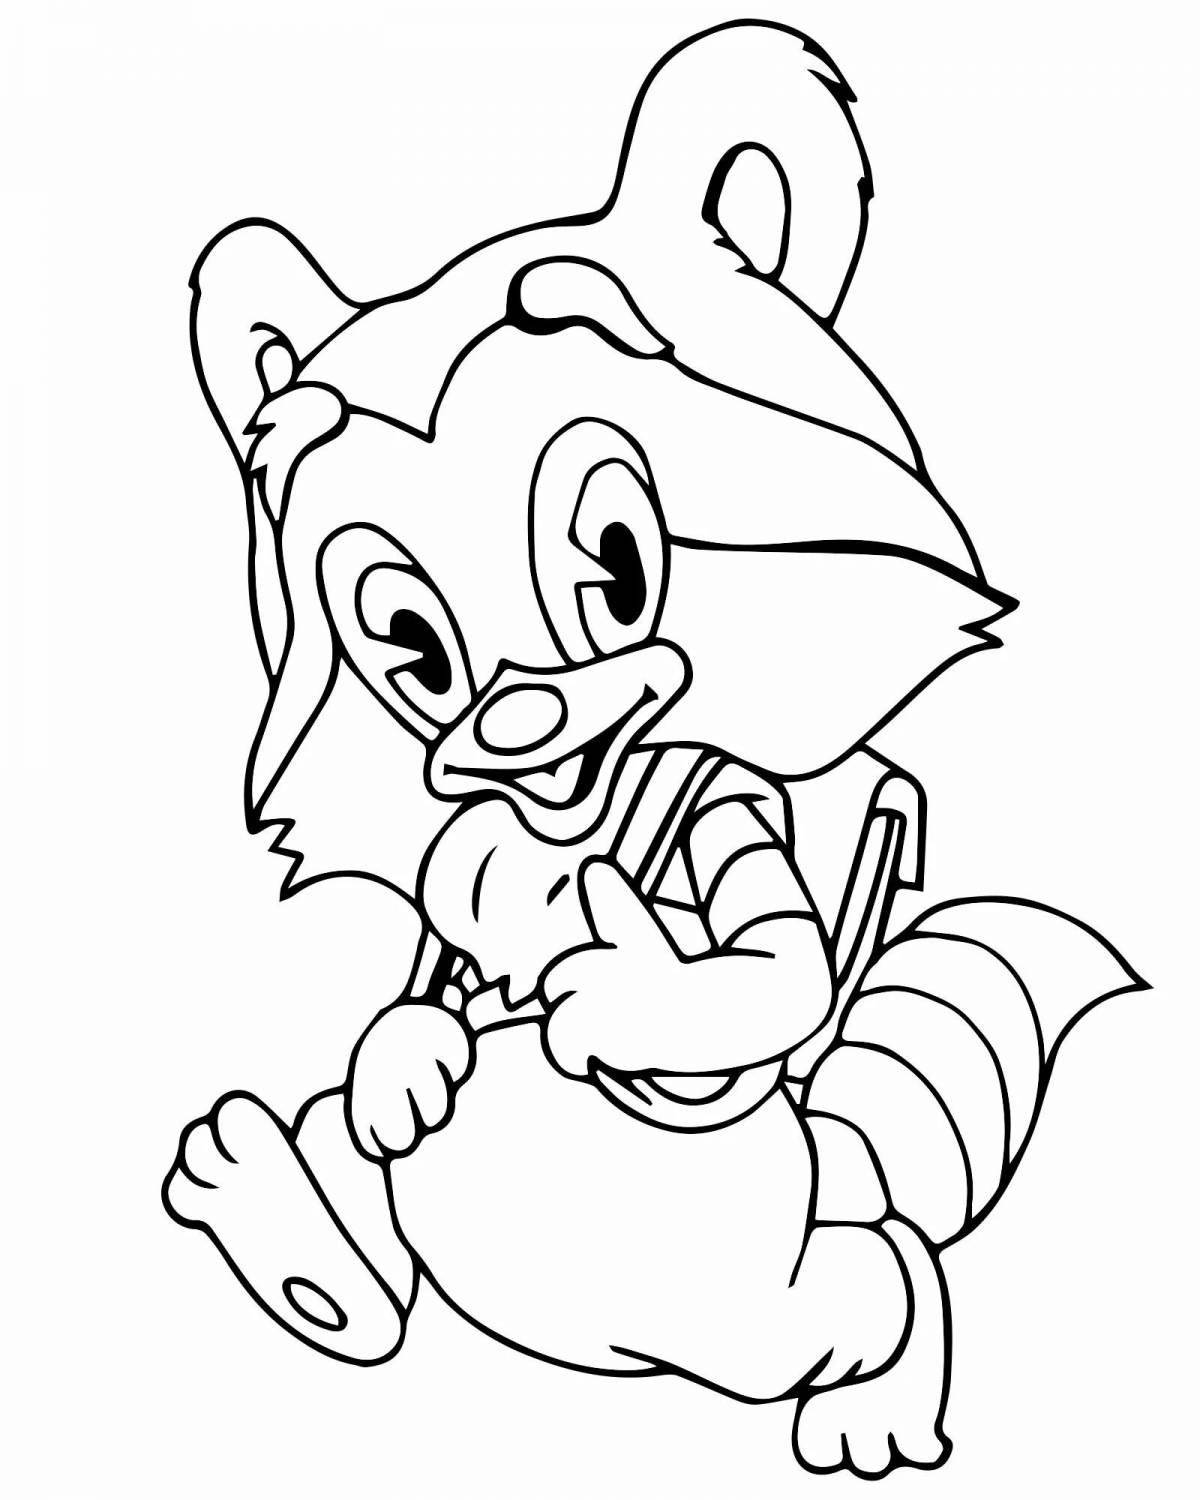 Dynamic cartoon character coloring page